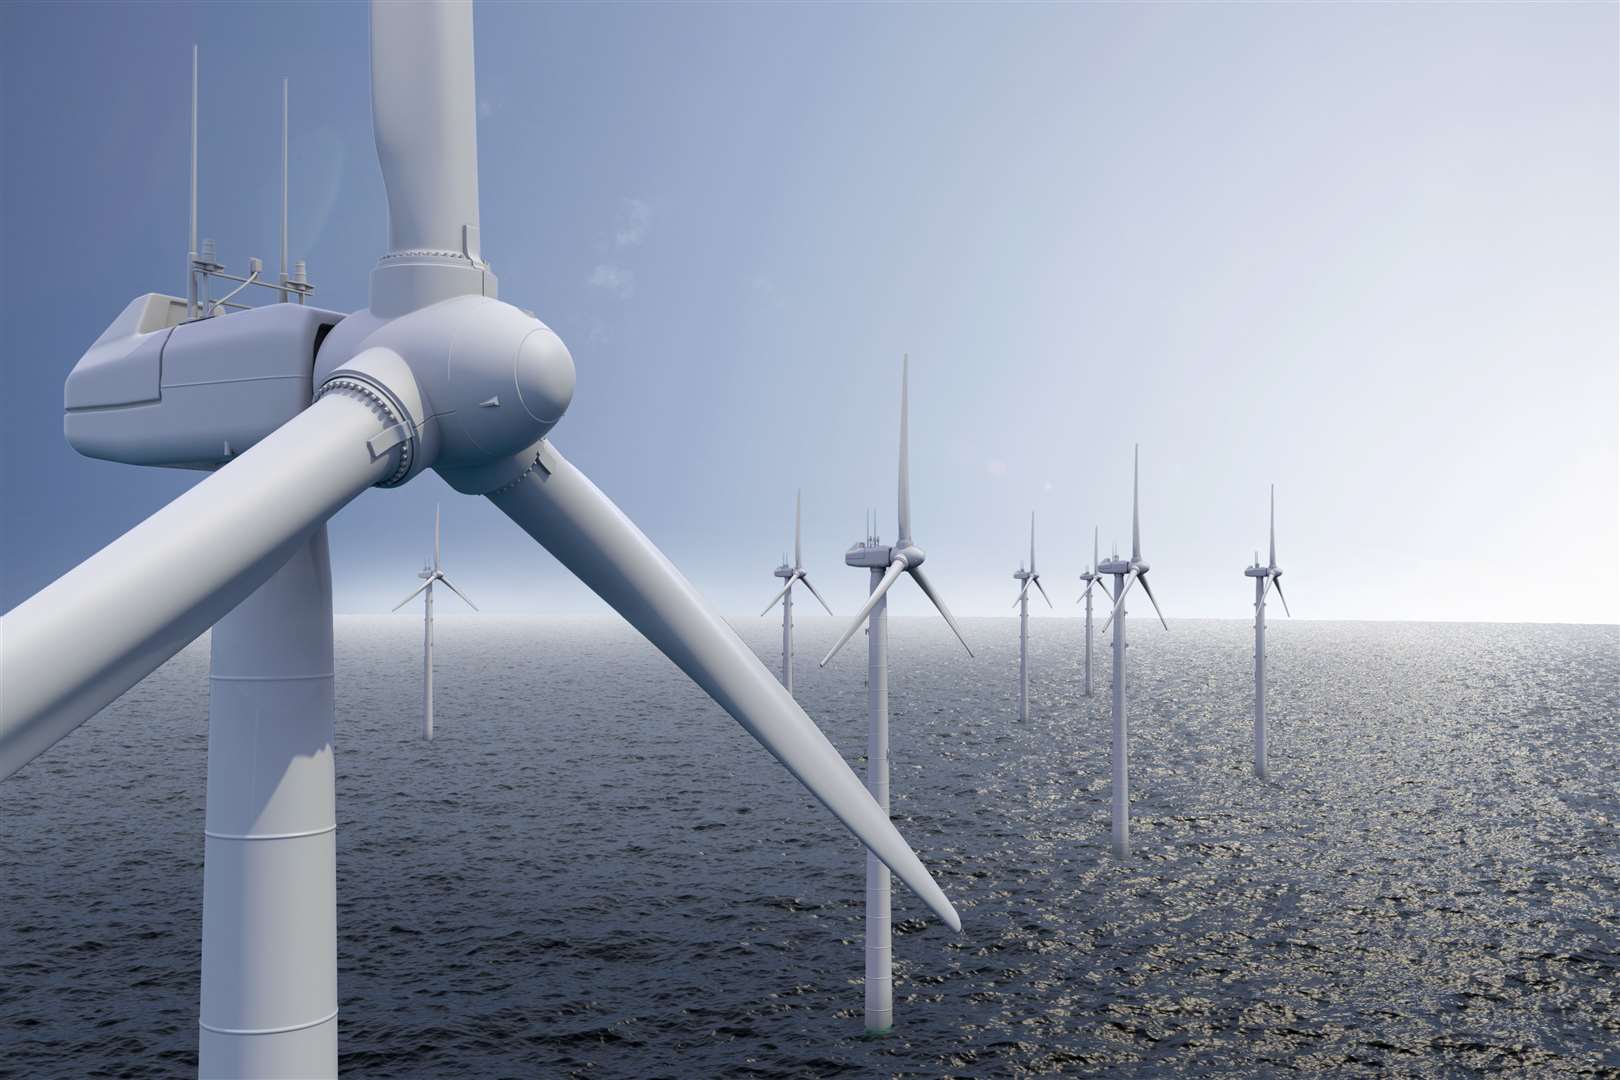 Up to 10GW of capacity is expected to be developed via the ScotWind Leasing round.